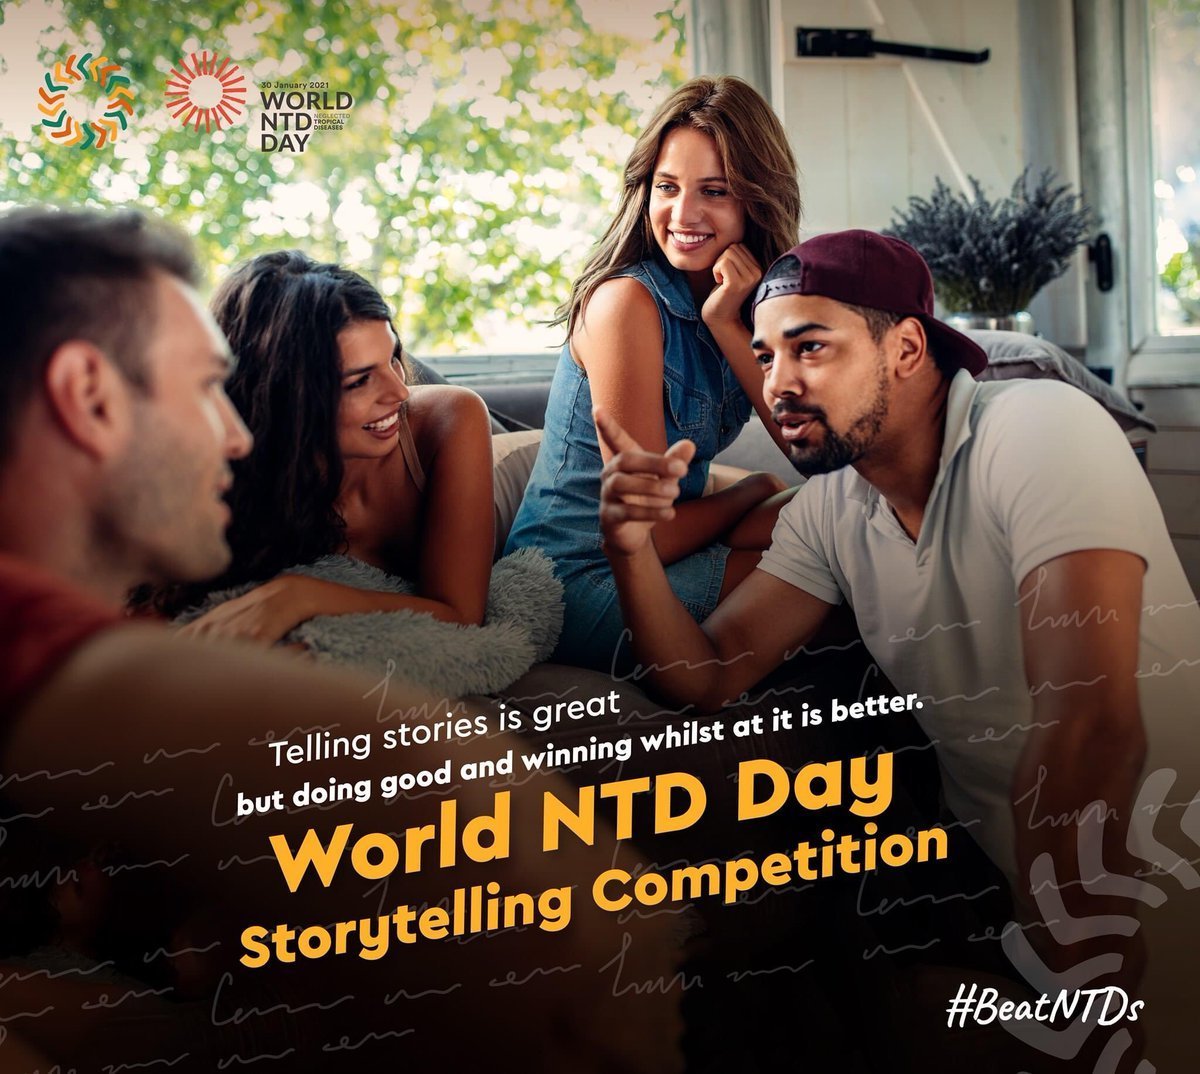 World NTD Storytelling Competition